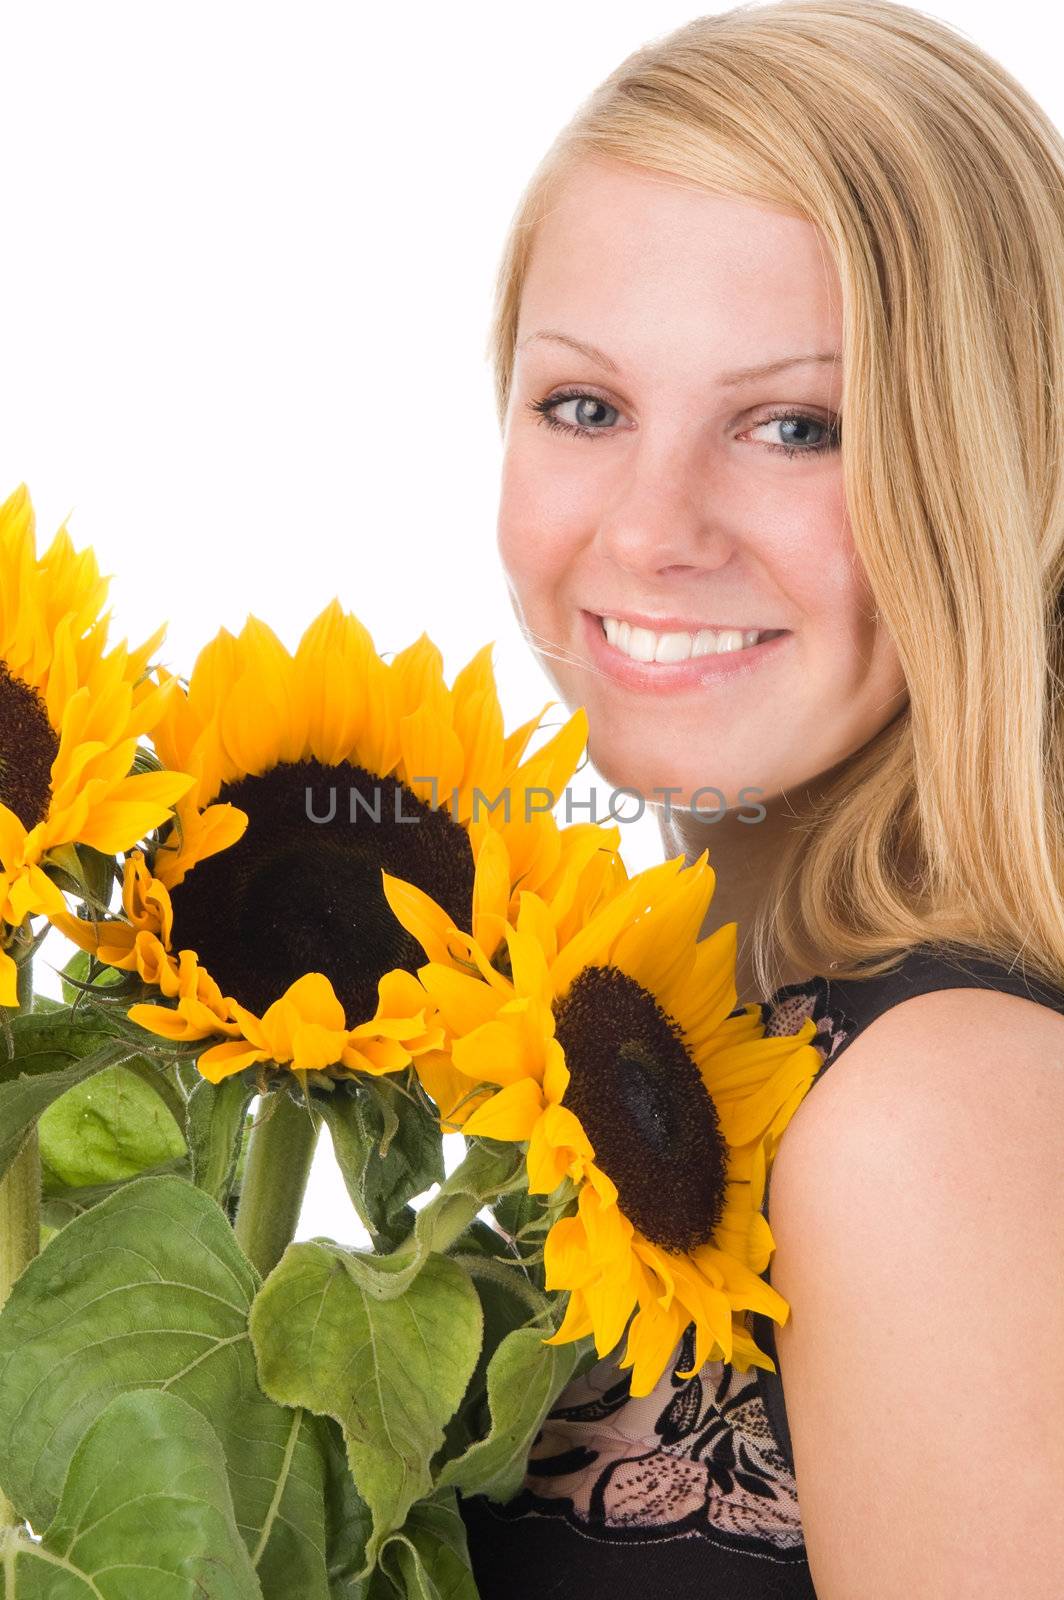 The attractive blonde in studio holds a sunflower in hands.